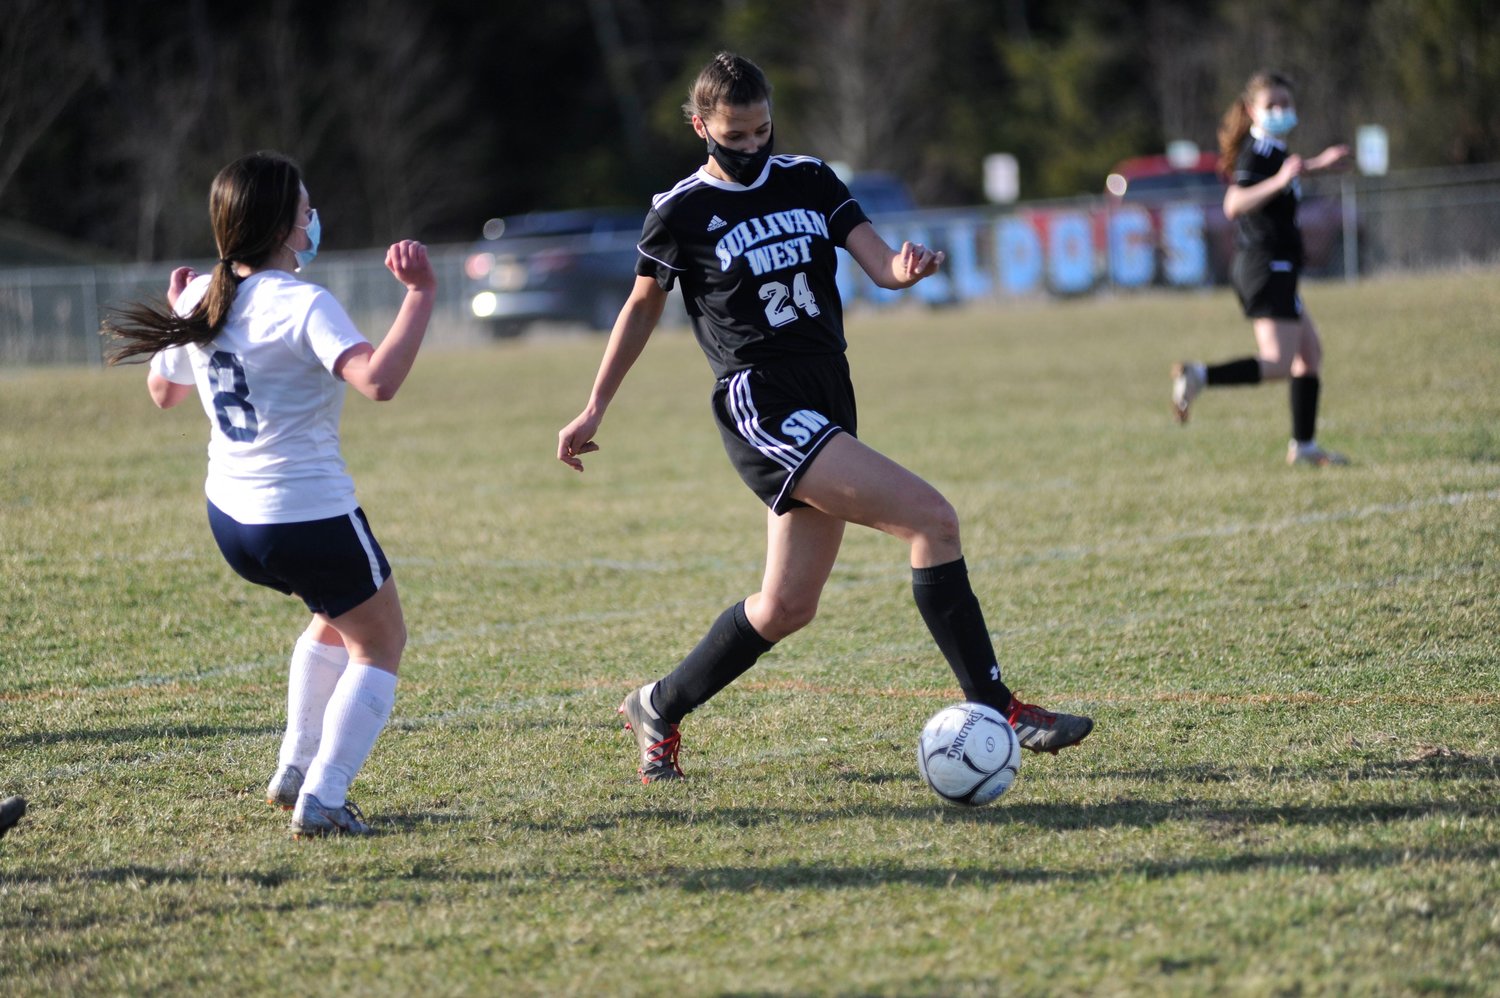 Tiptoe on the grass. Sullivan West’s Anna Bernas gets an edge on the ball as the Lady Bears Clare Verbert closes in.